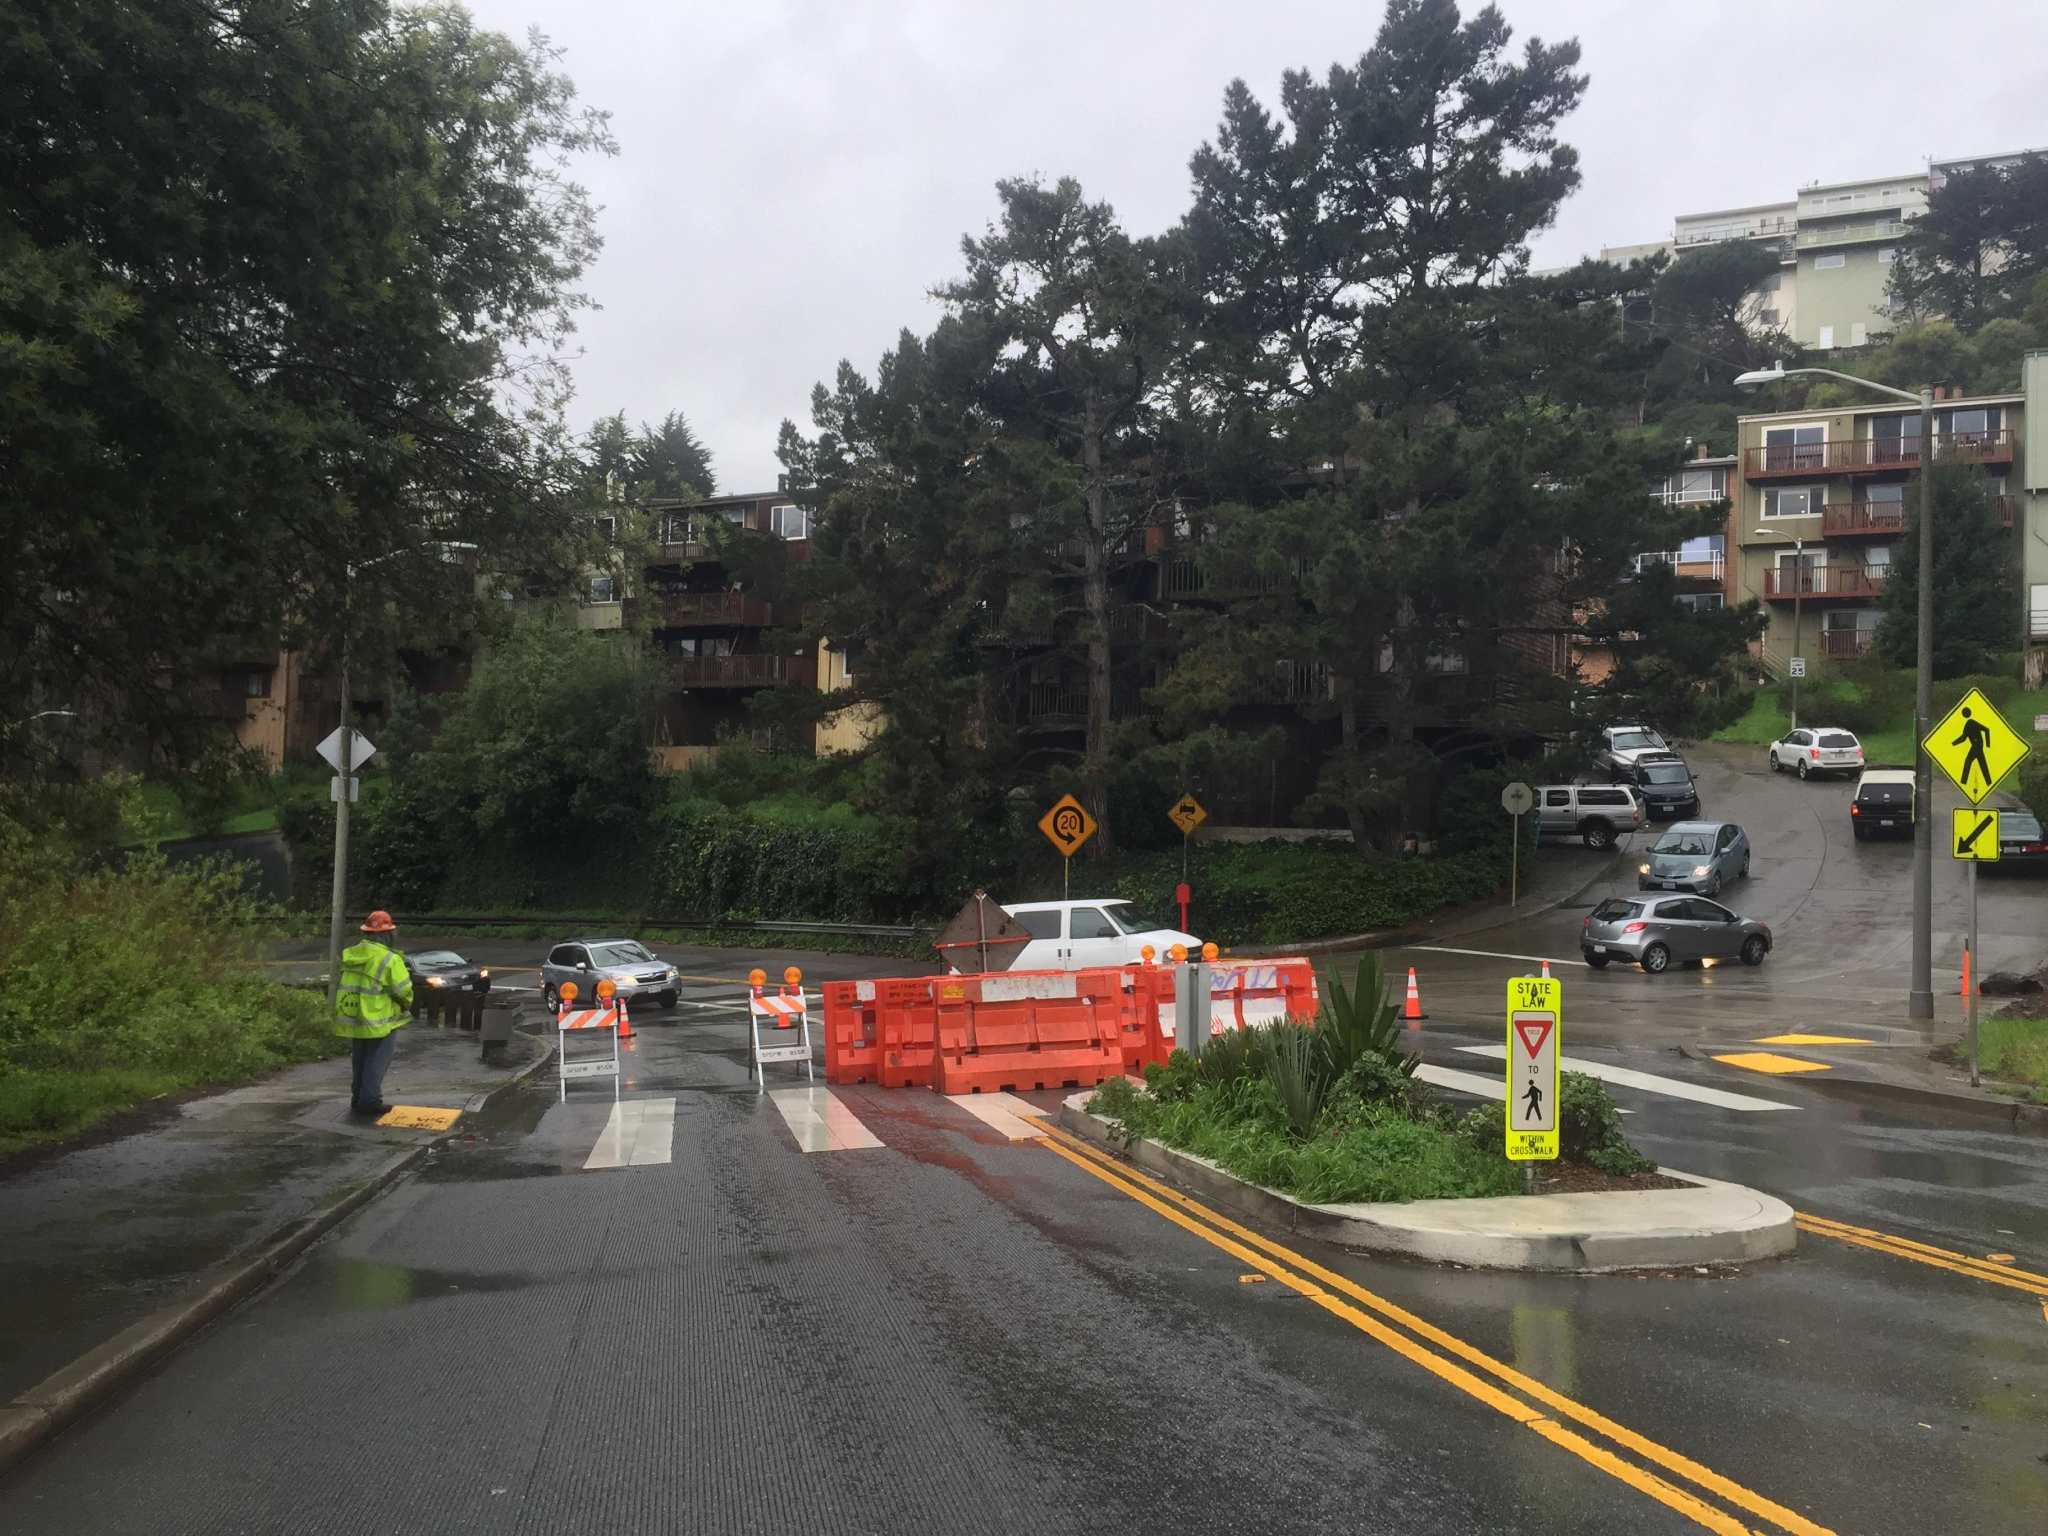 Unstable cliff causes closure of major San Francisco road - SFGate